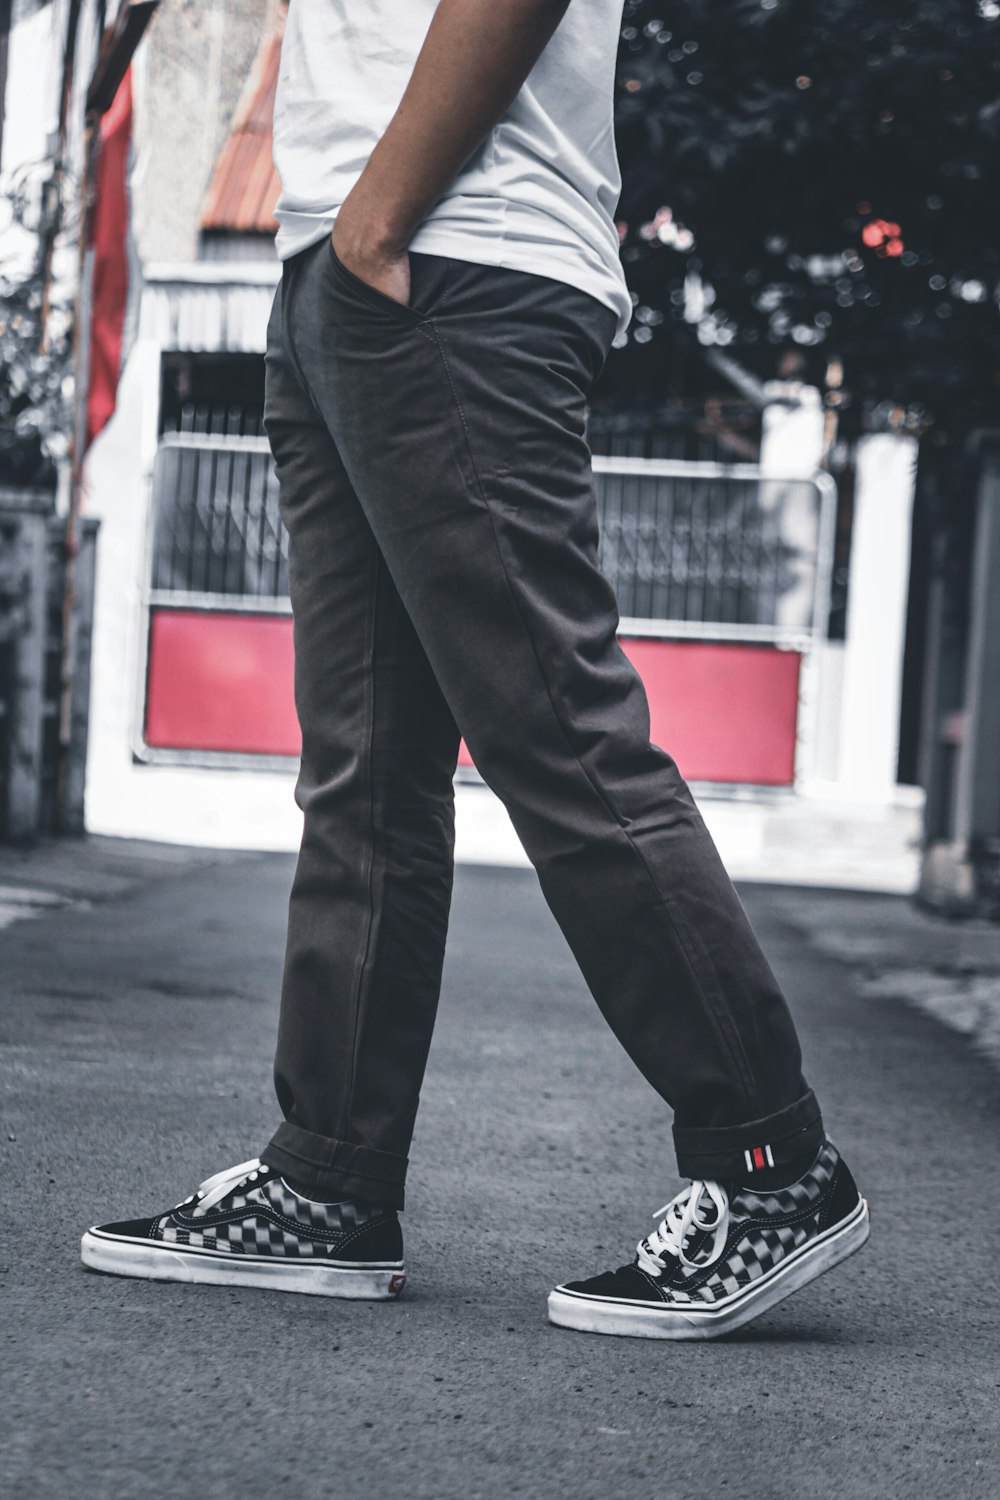 person in black pants and black and white nike sneakers